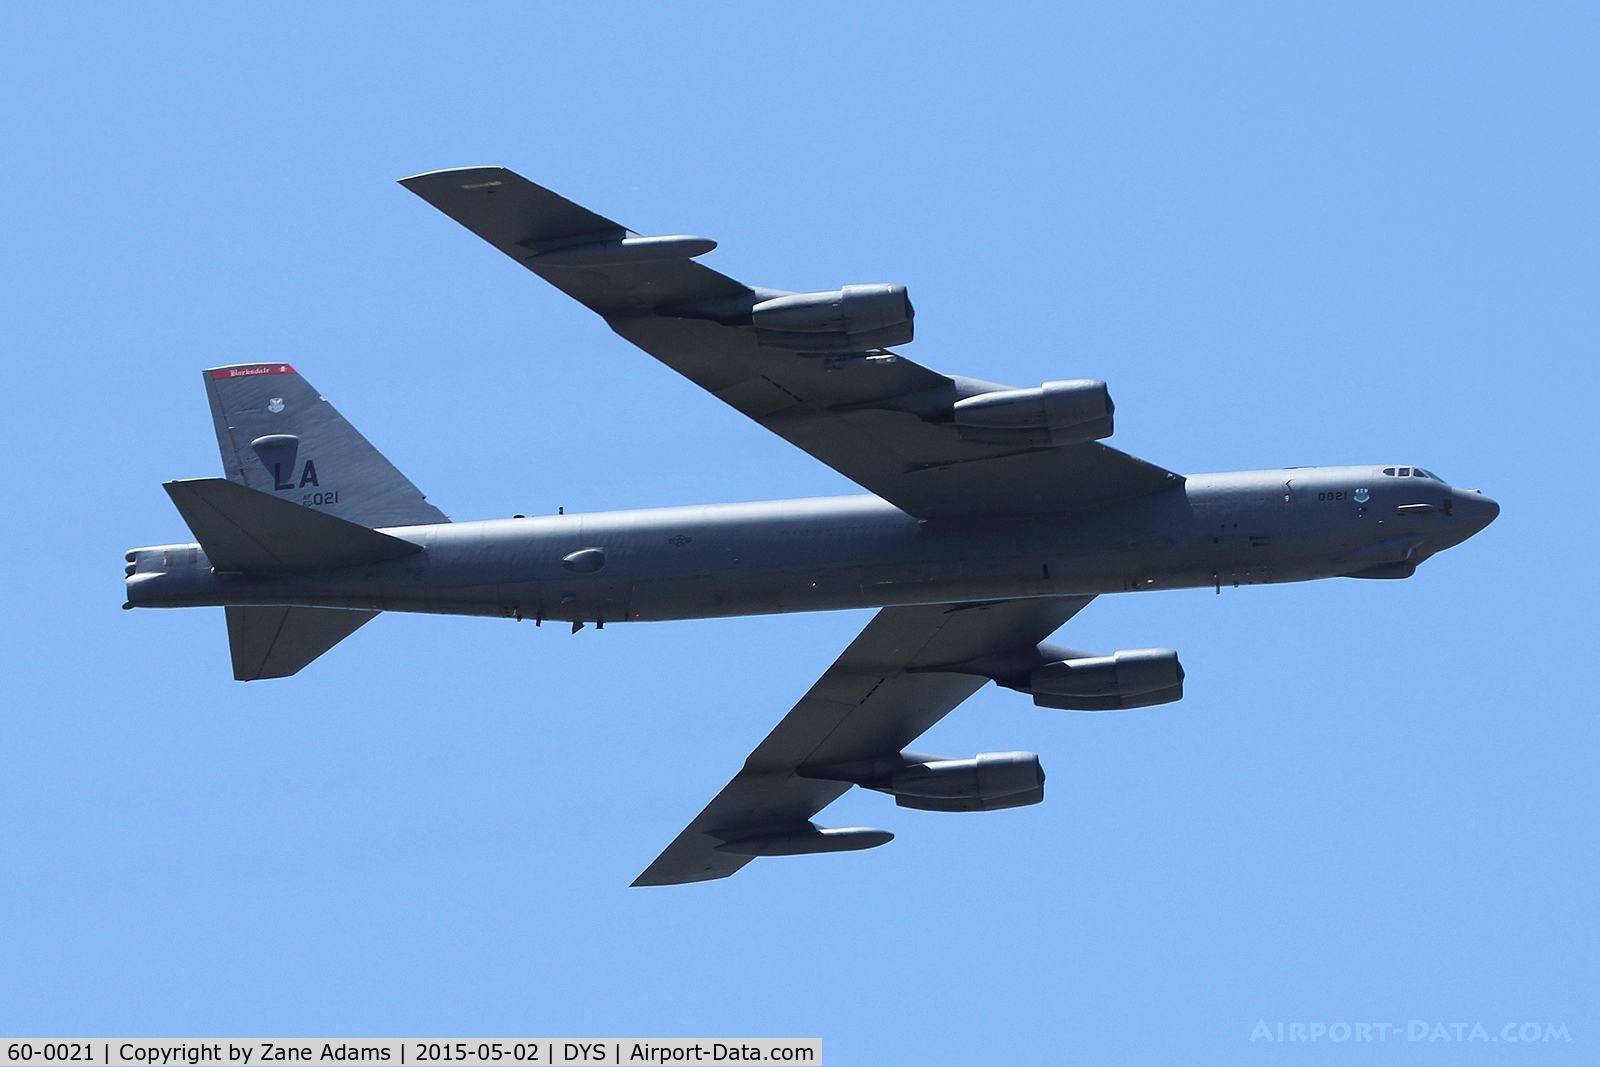 60-0021, 1960 Boeing B-52H Stratofortress C/N 464386, At the 2014 Big Country Airshow - Dyess AFB, TX